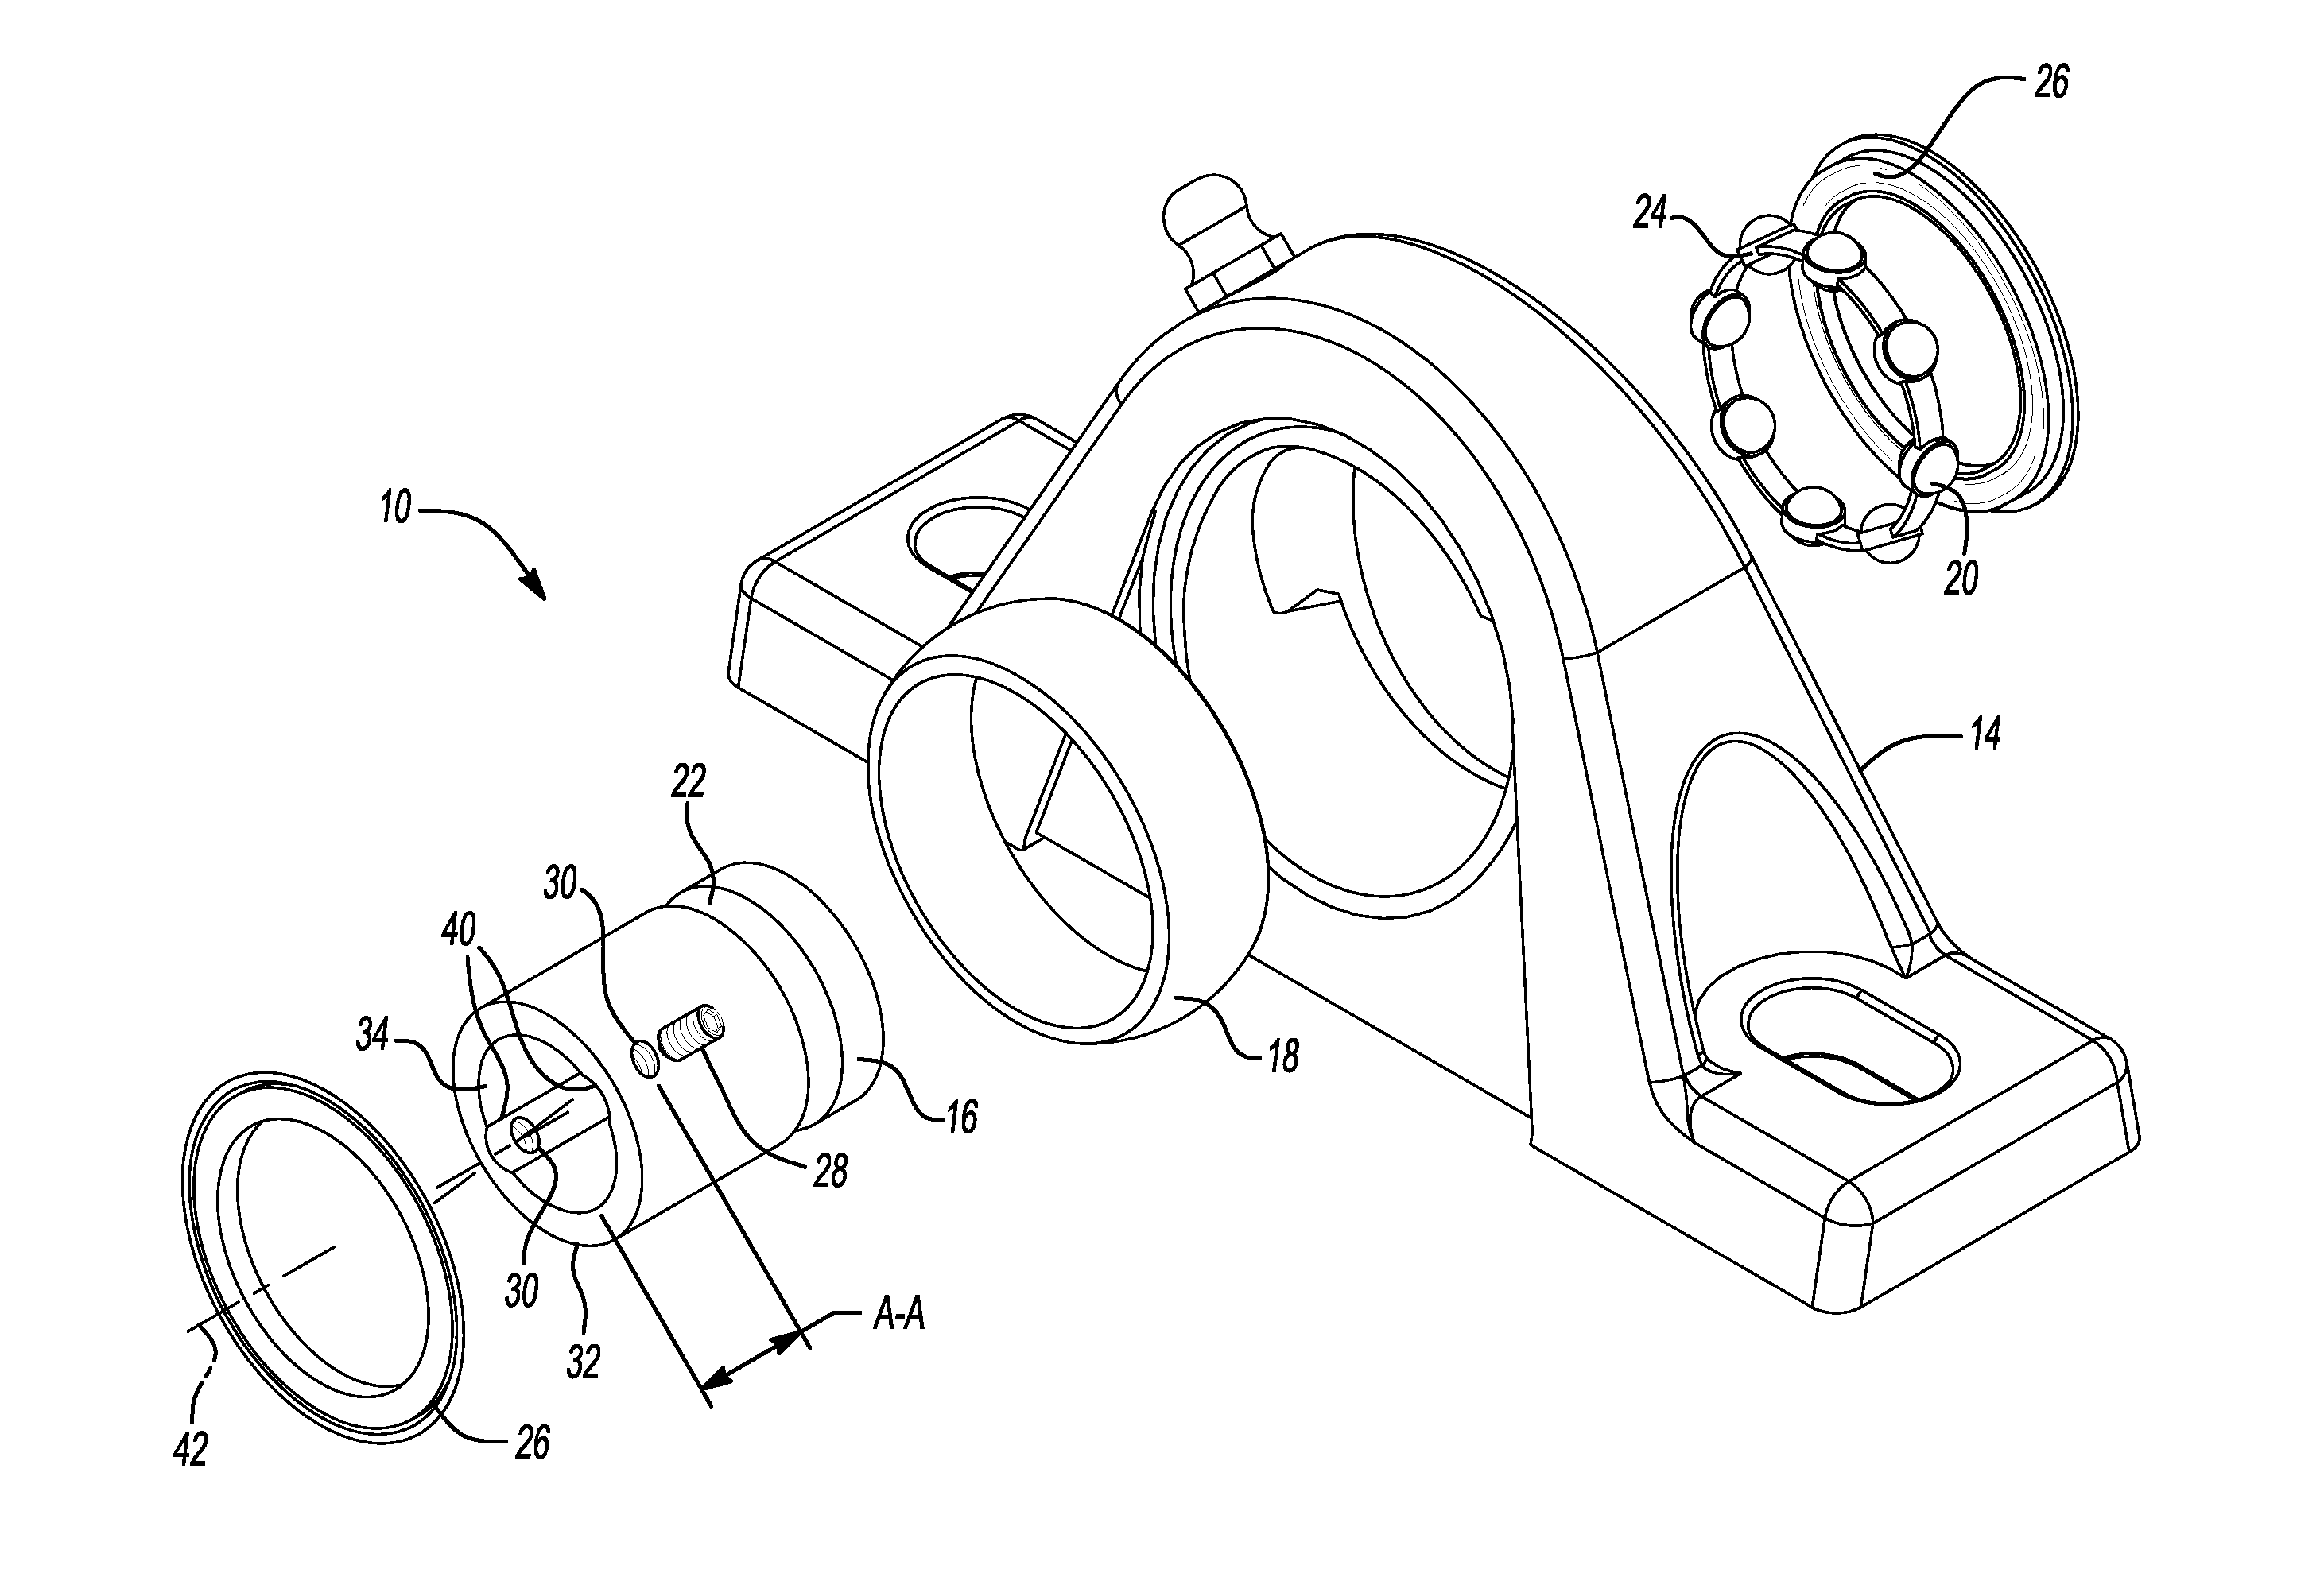 Burr resistant fastener-mounted bearing assembly